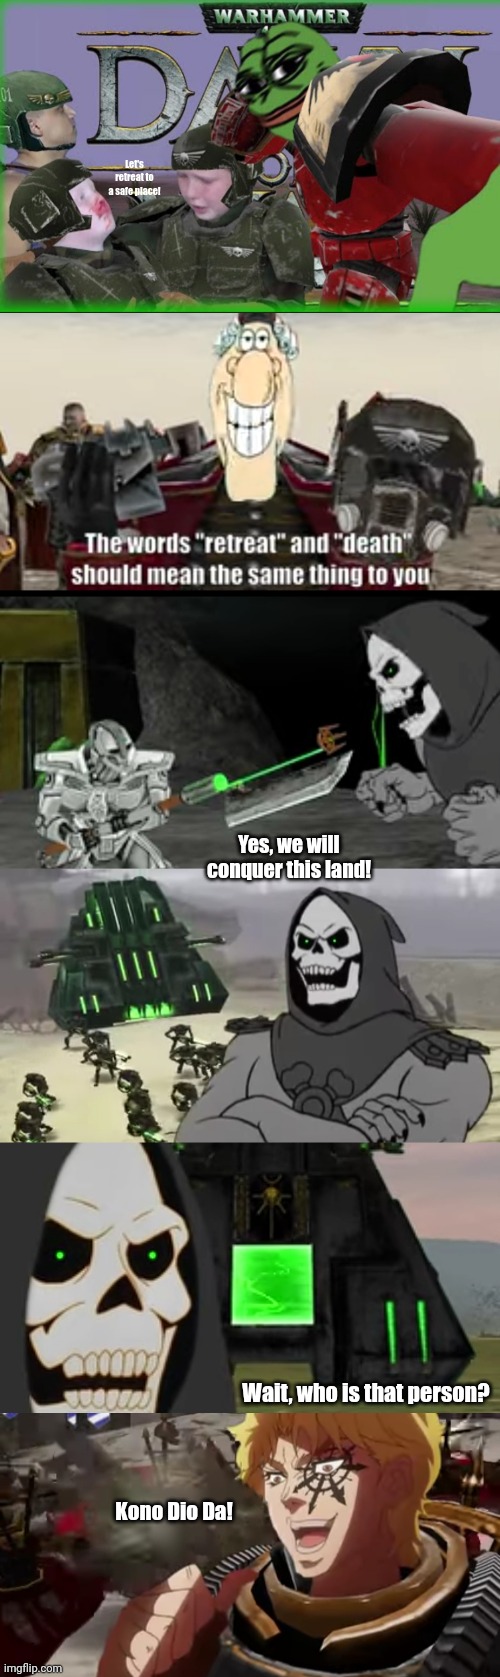 Let's retreat to a safe place! Yes, we will conquer this land! Wait, who is that person? Kono Dio Da! | image tagged in memes,necron,wars | made w/ Imgflip meme maker